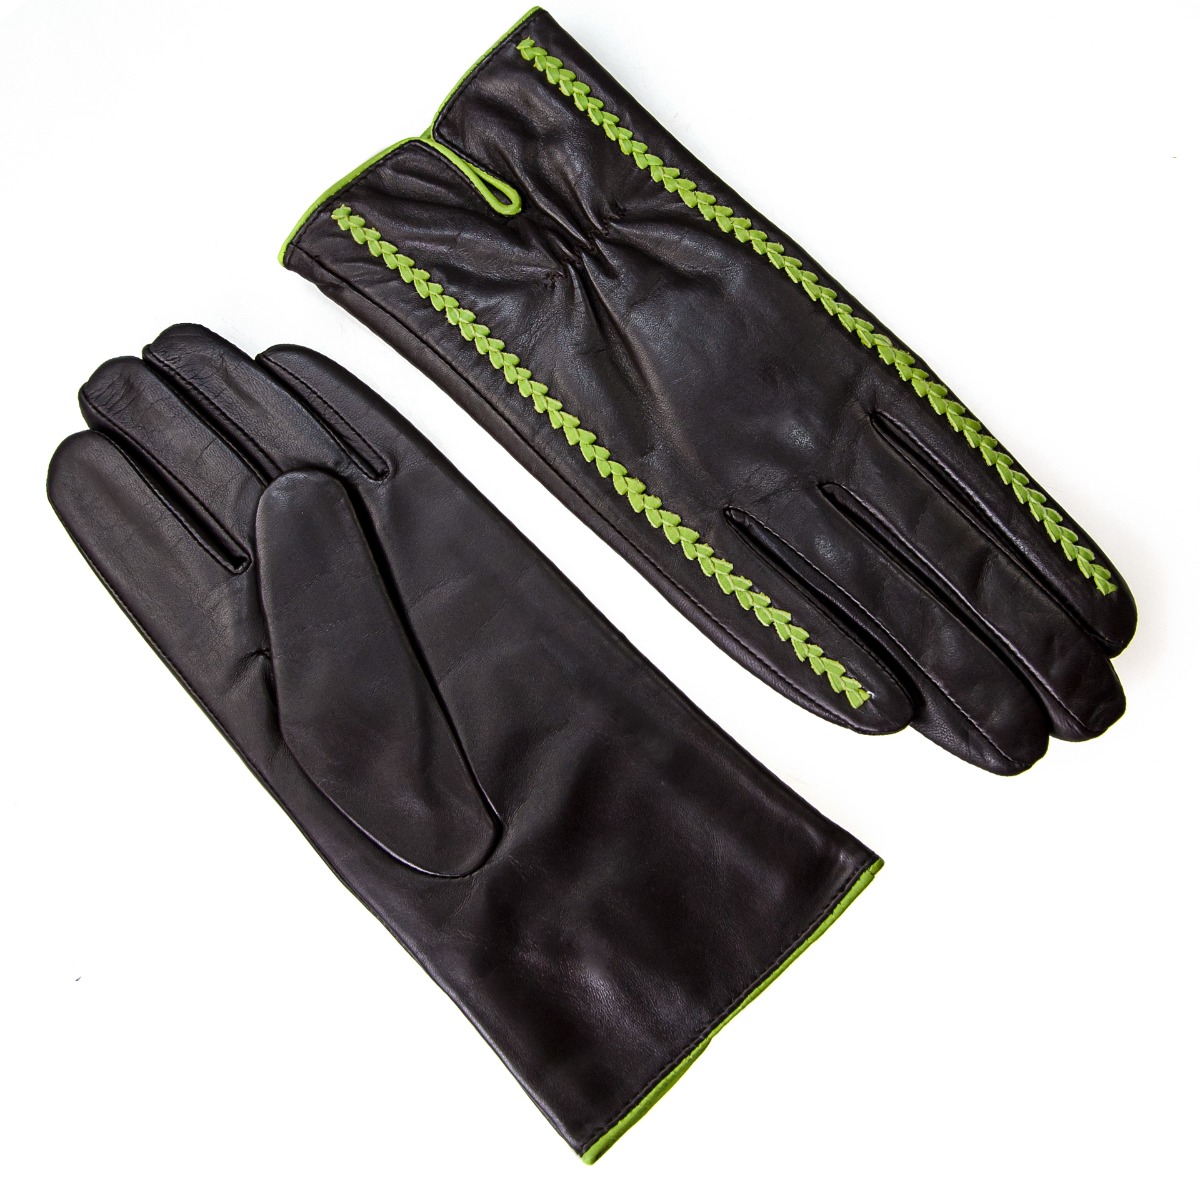 Leather gloves M - Allora image 2